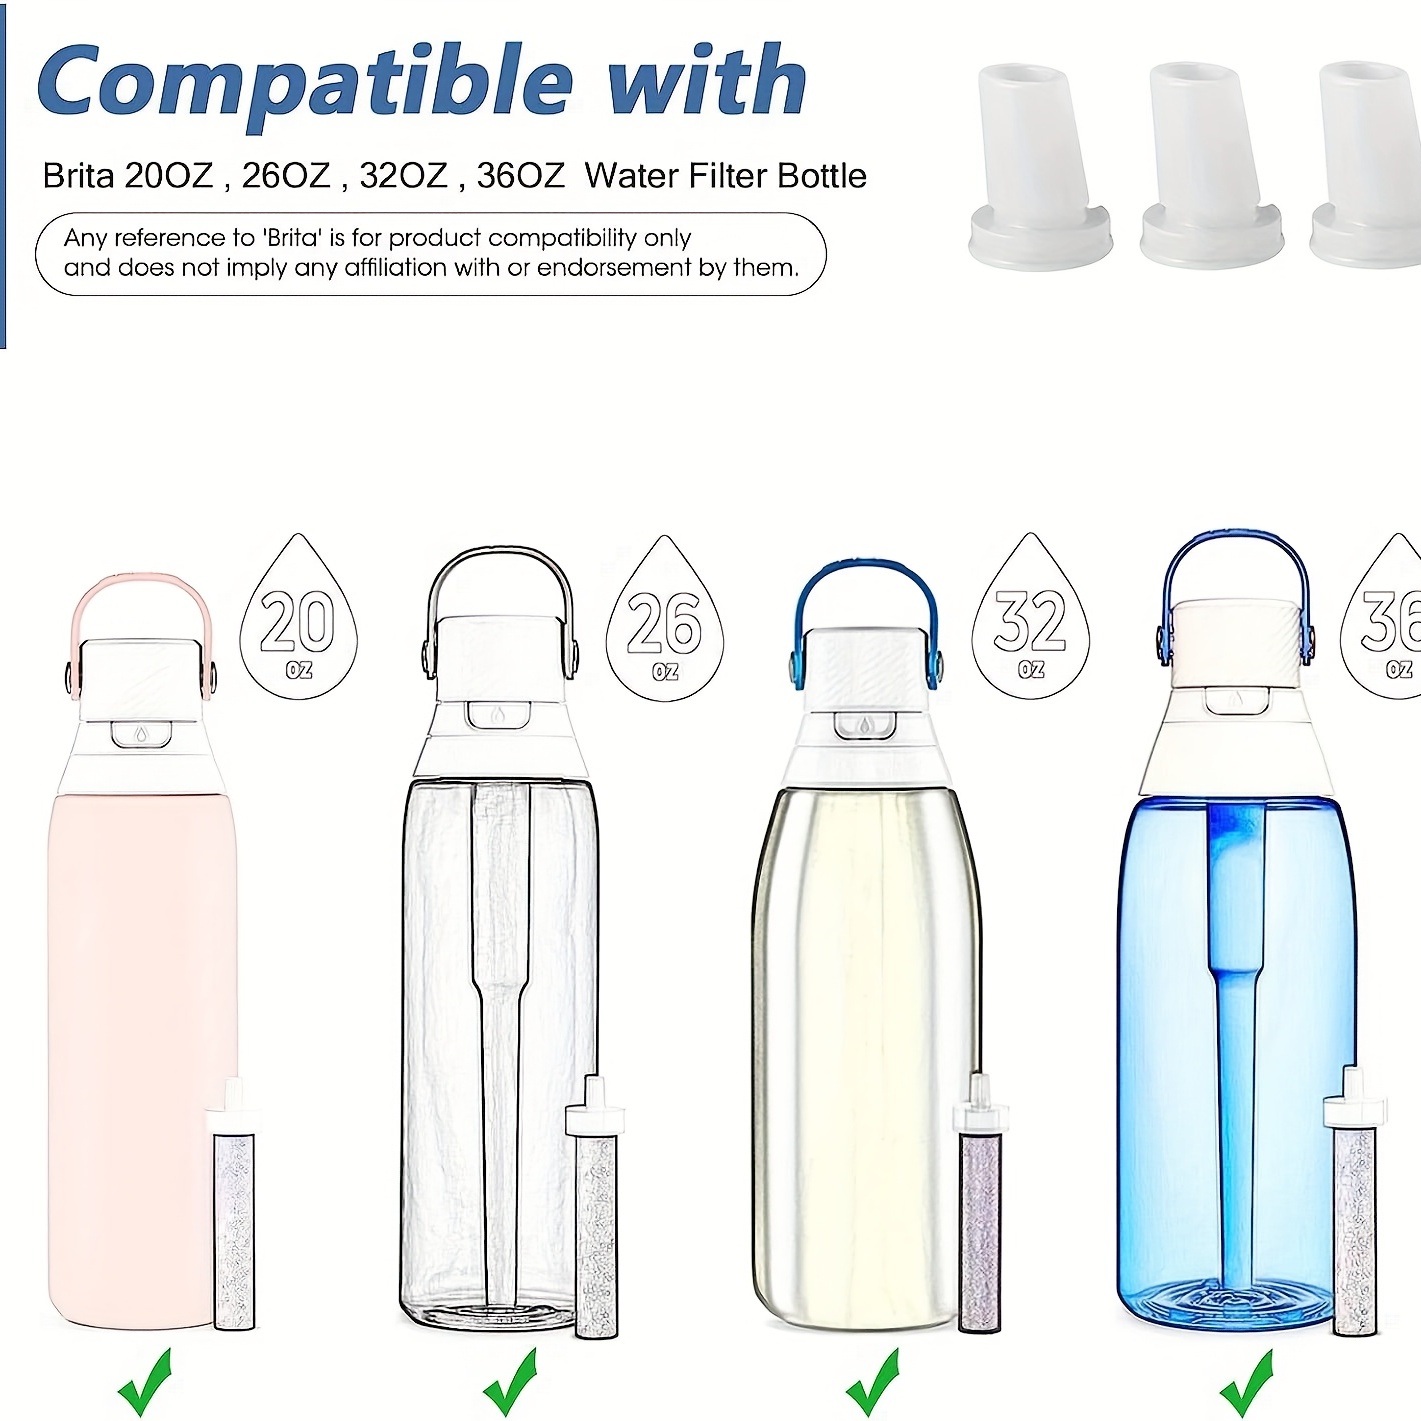 GLACIER FRESH Bite Valve Replacement for Brita Water Bottle，Silicone Water  Bottle Mouthpiece for Brita Stainless Steel Water Bottle 32oz, 20oz and Brita  Plastic Water Bottle 36oz, 26oz，3 pack - Yahoo Shopping